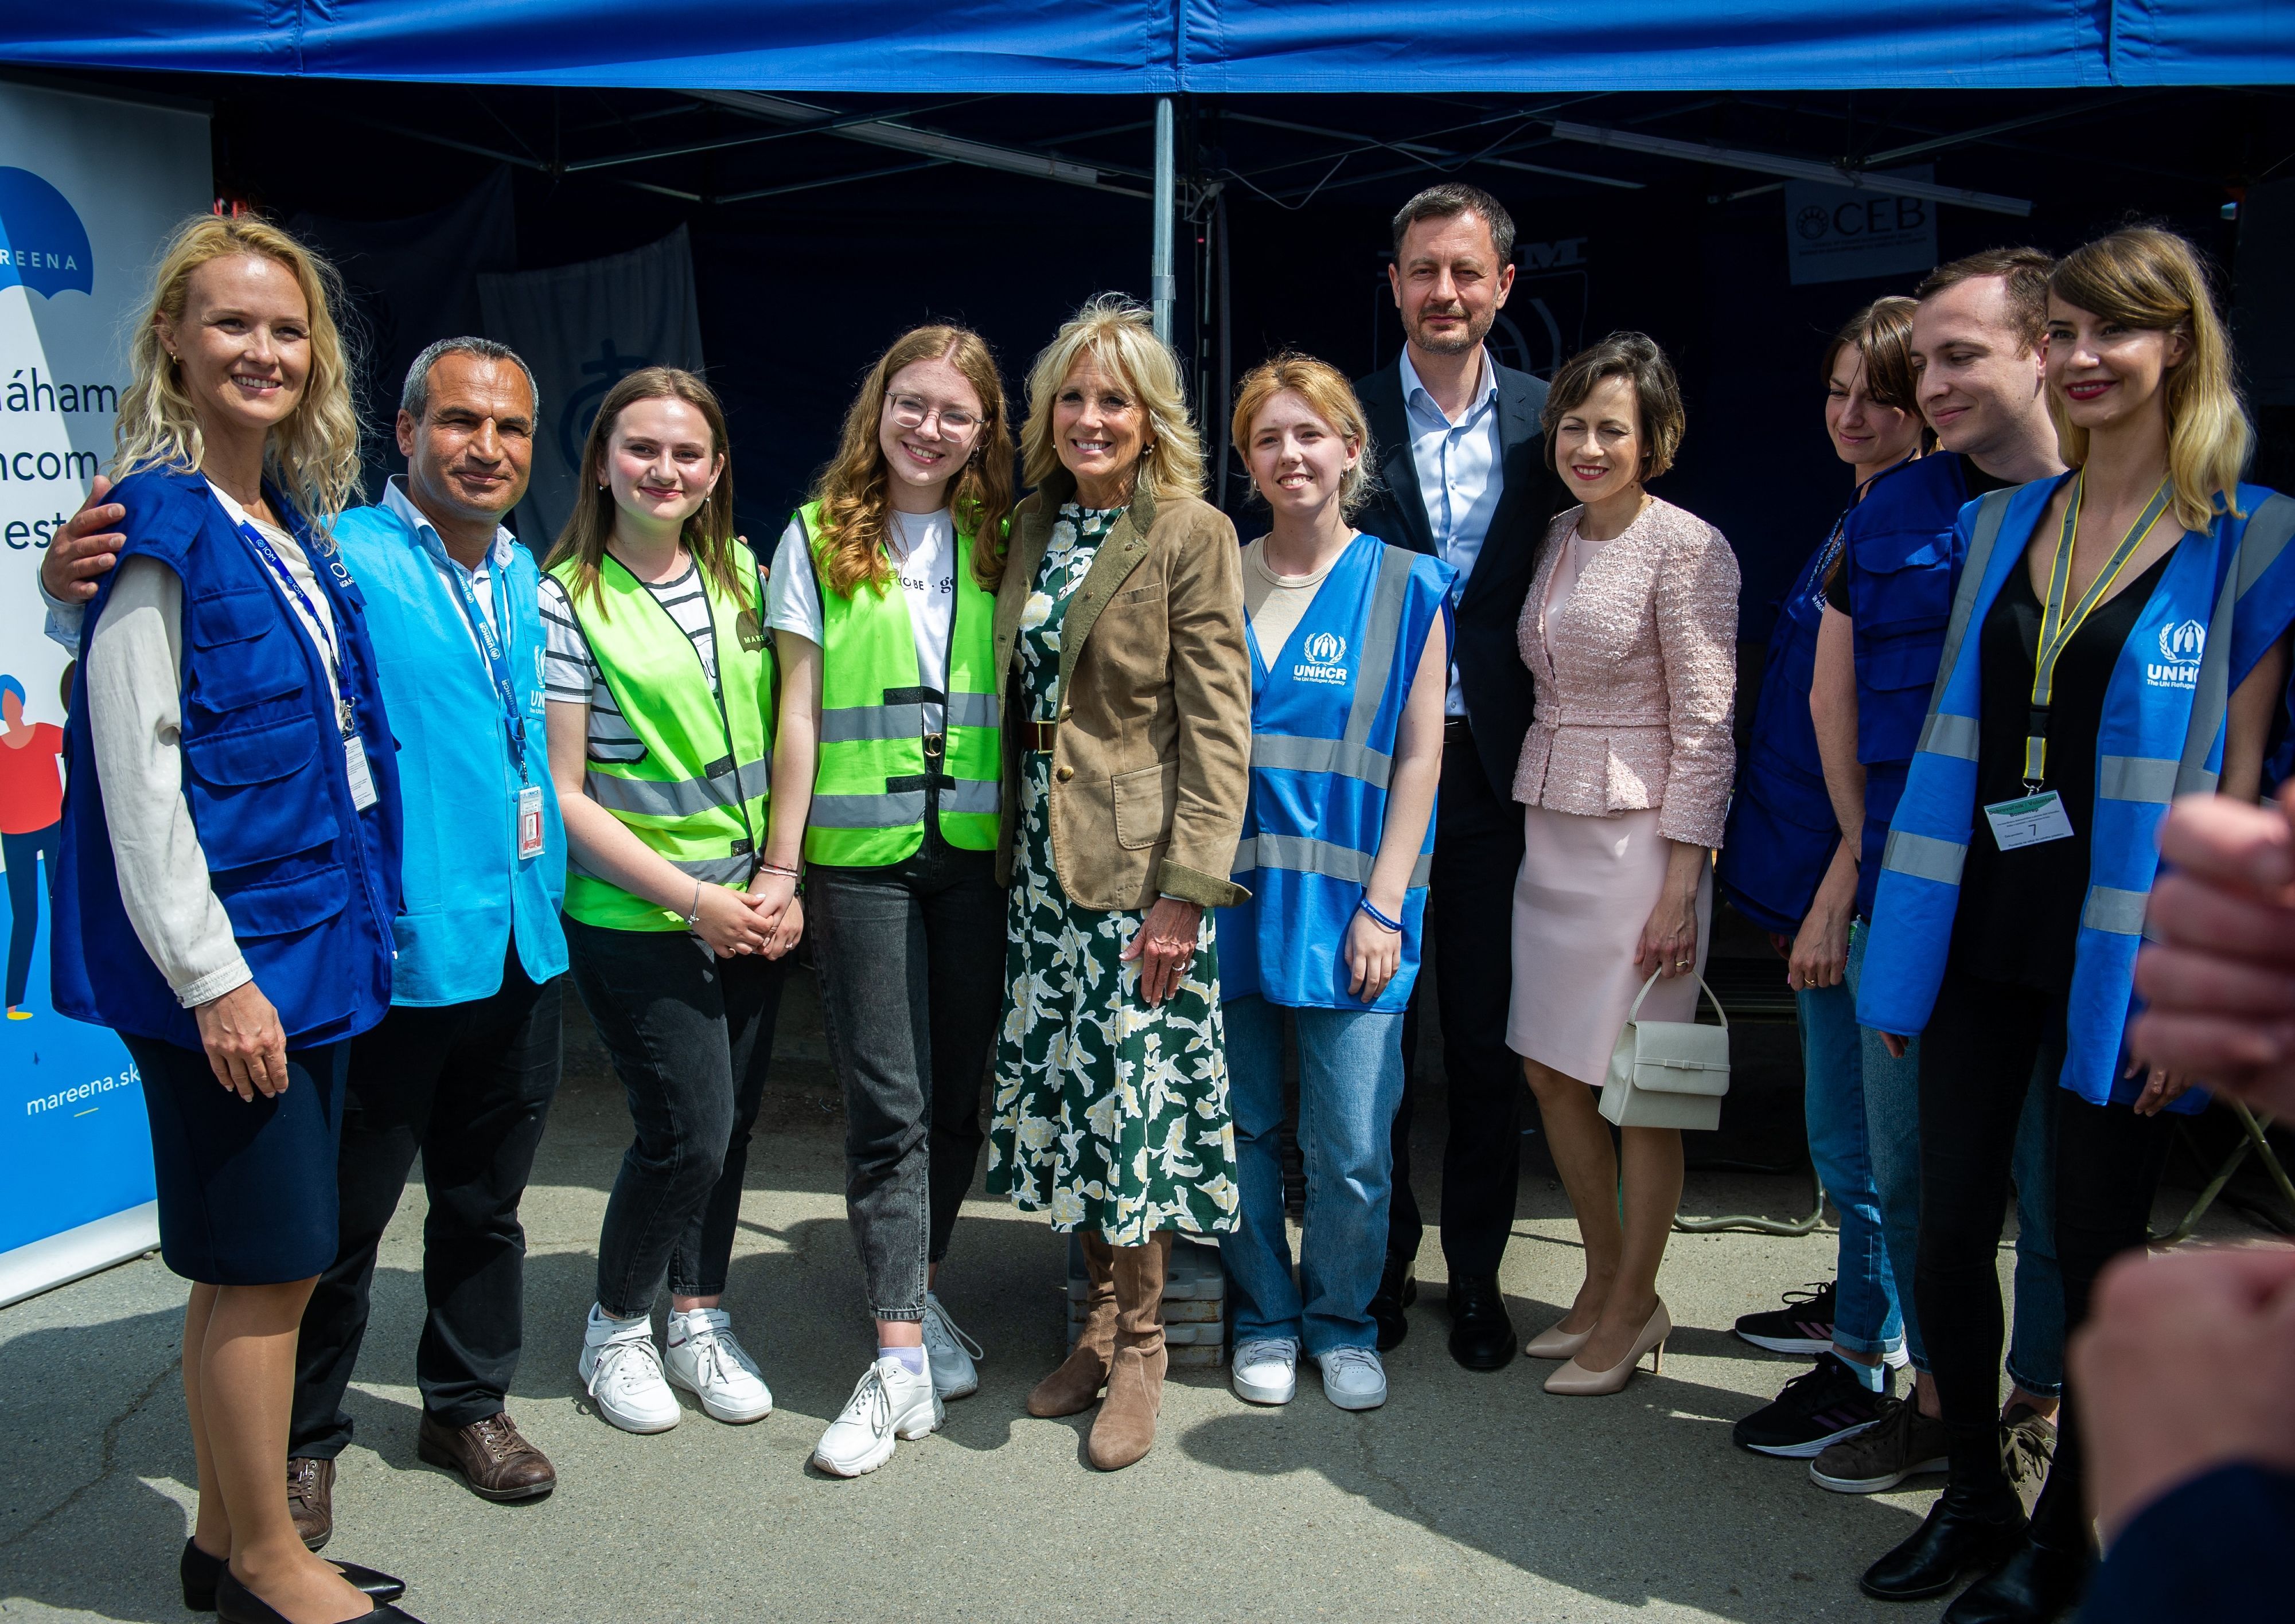 Jill Biden (C) and Slovak Prime Minister Eduard Heger with his wife Lucia Hegerova pose with aid workers and volunteers as they visit the Slovak-Ukrainian border